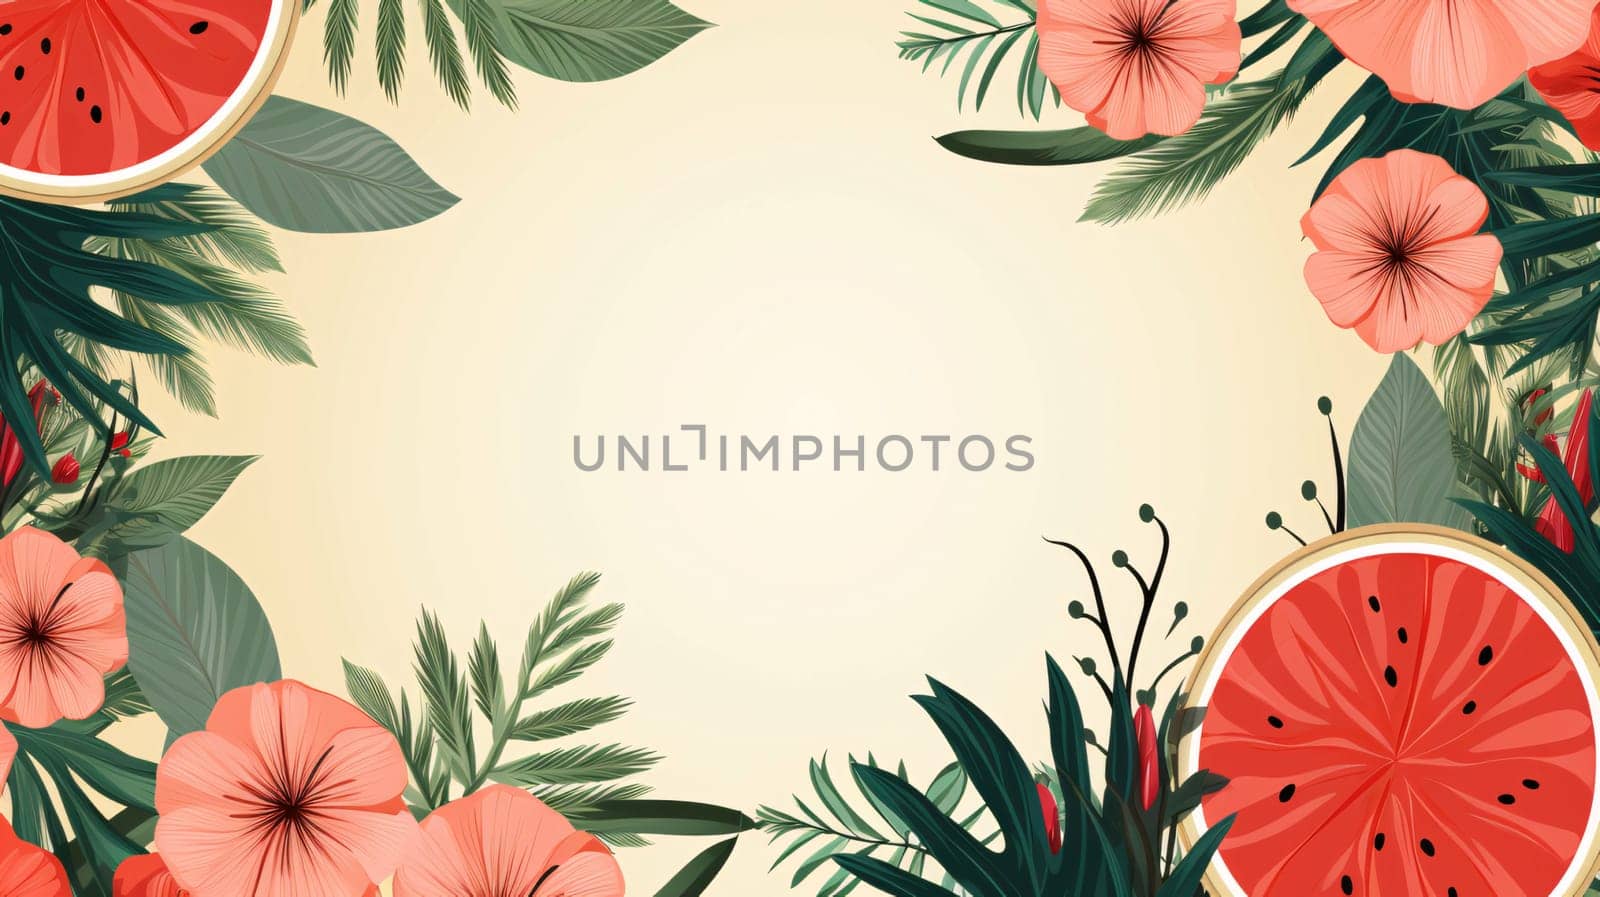 White blank card with space for your own content as an image. Around the decoration of painted colorful flowers and leaves. Graphic with space for your own content.